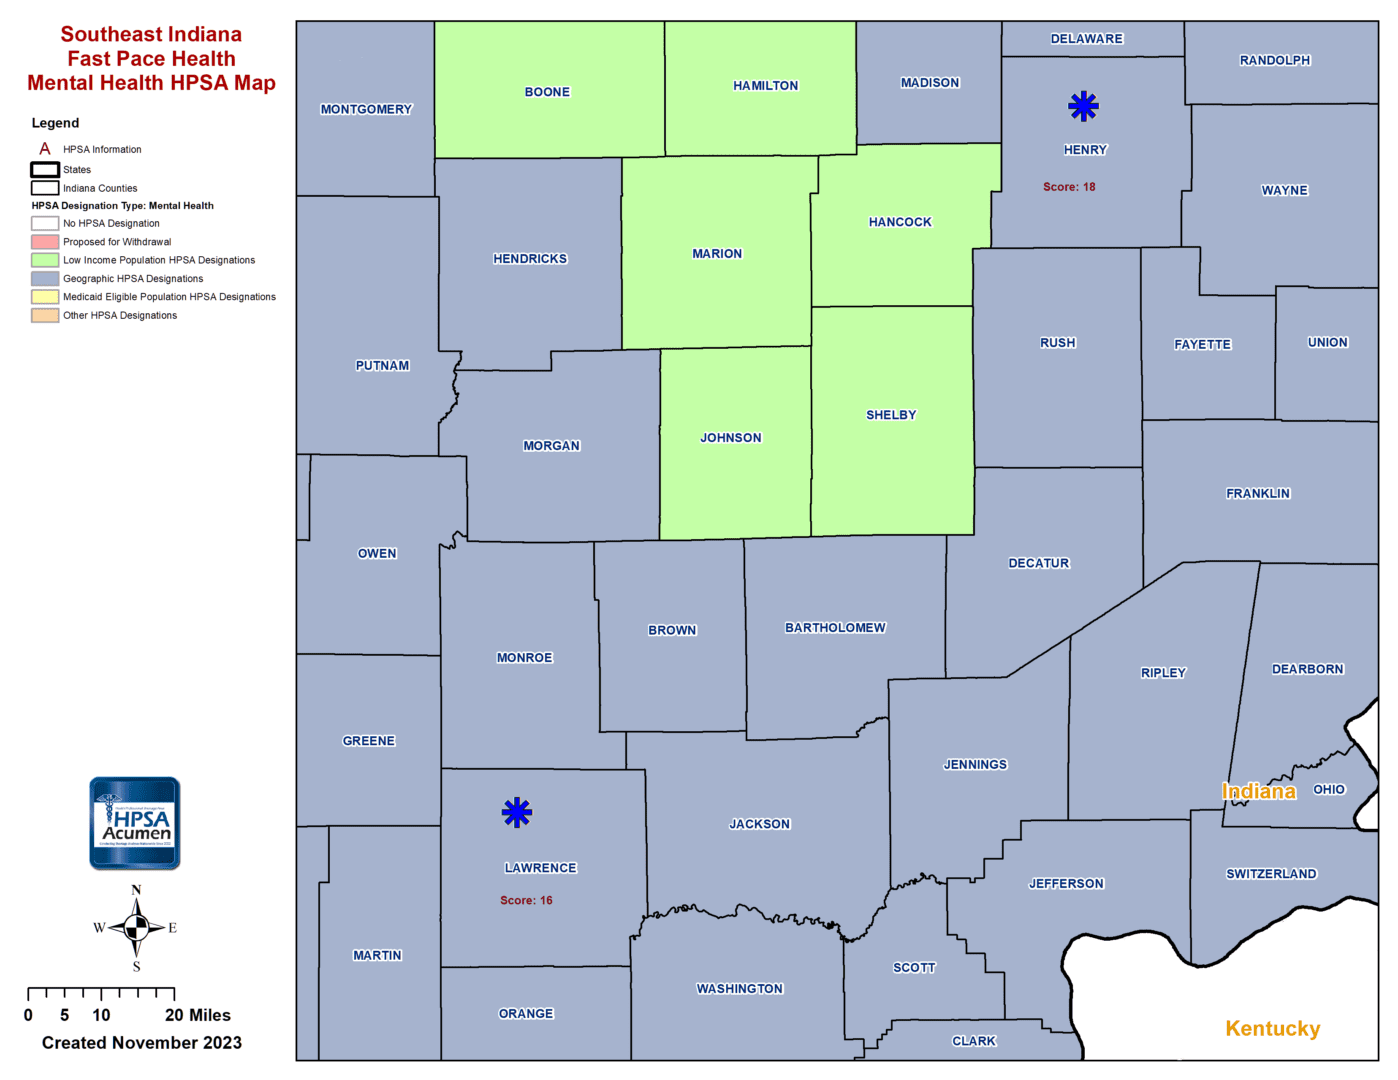 Fast Pace Health Southeast Indiana MH HPSA Map